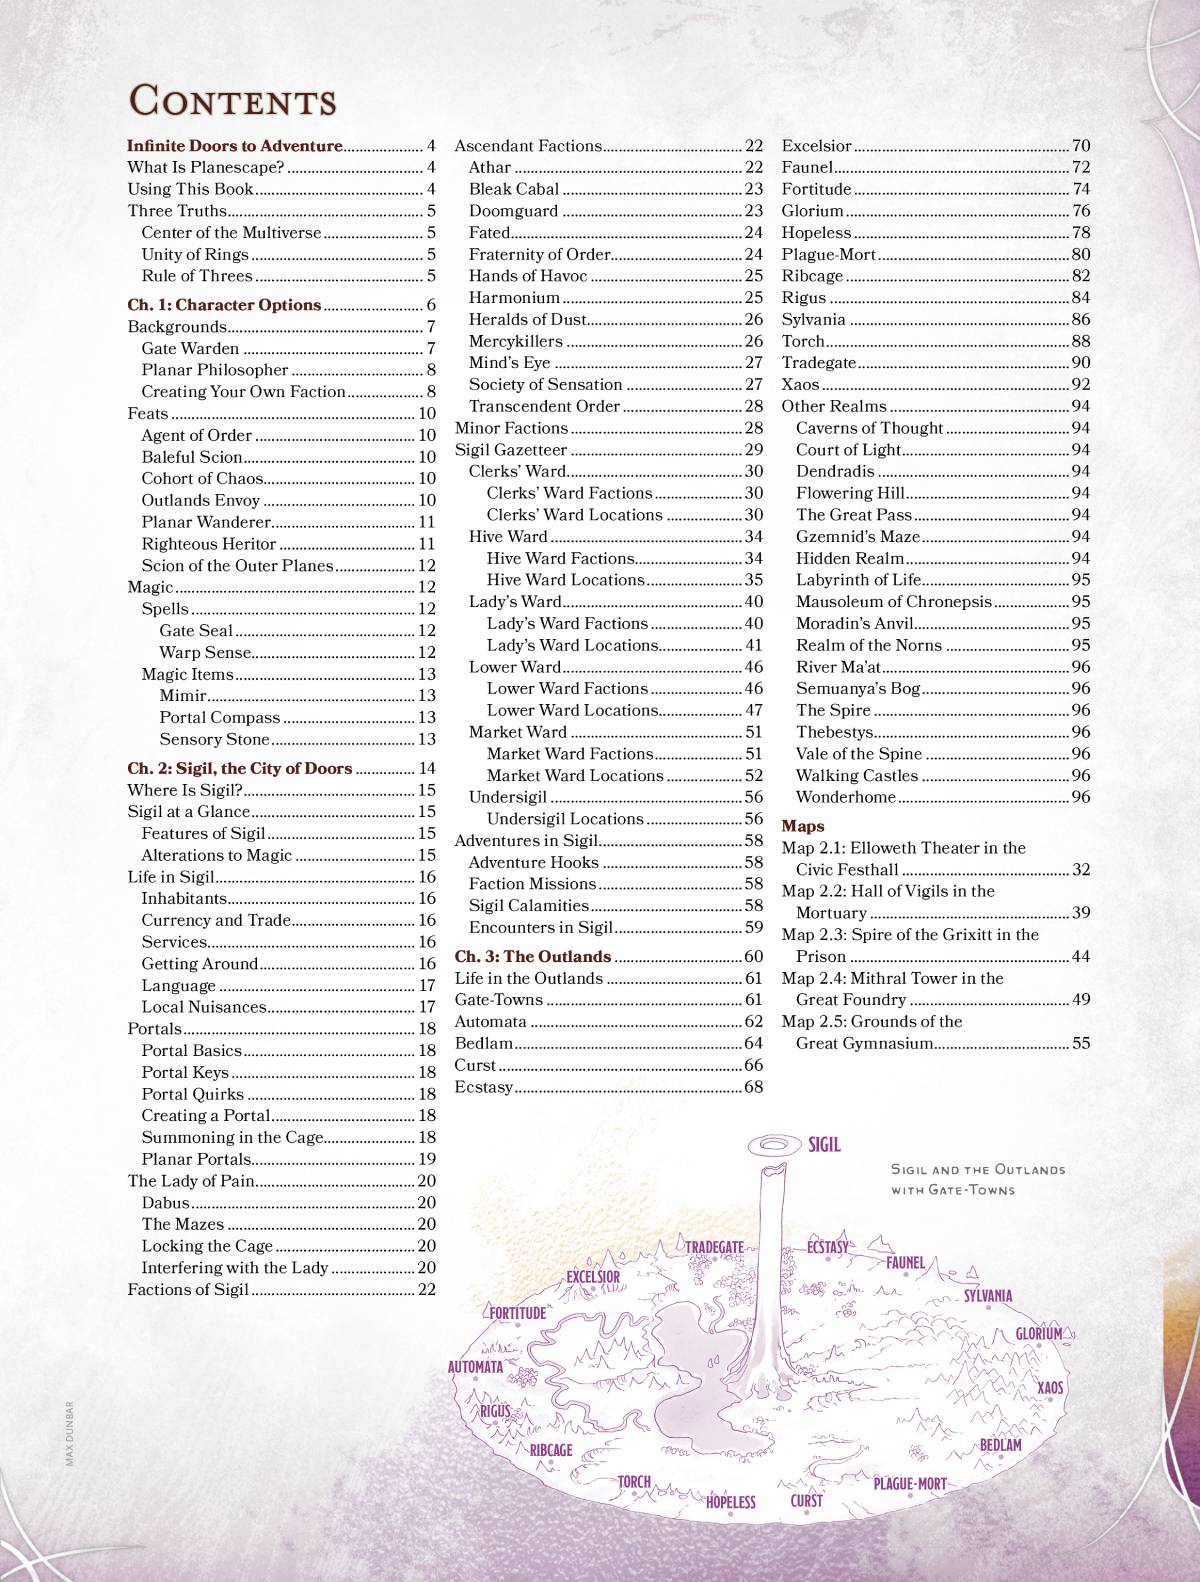 A screenshot of the table of contents for Sigil and the Outlands